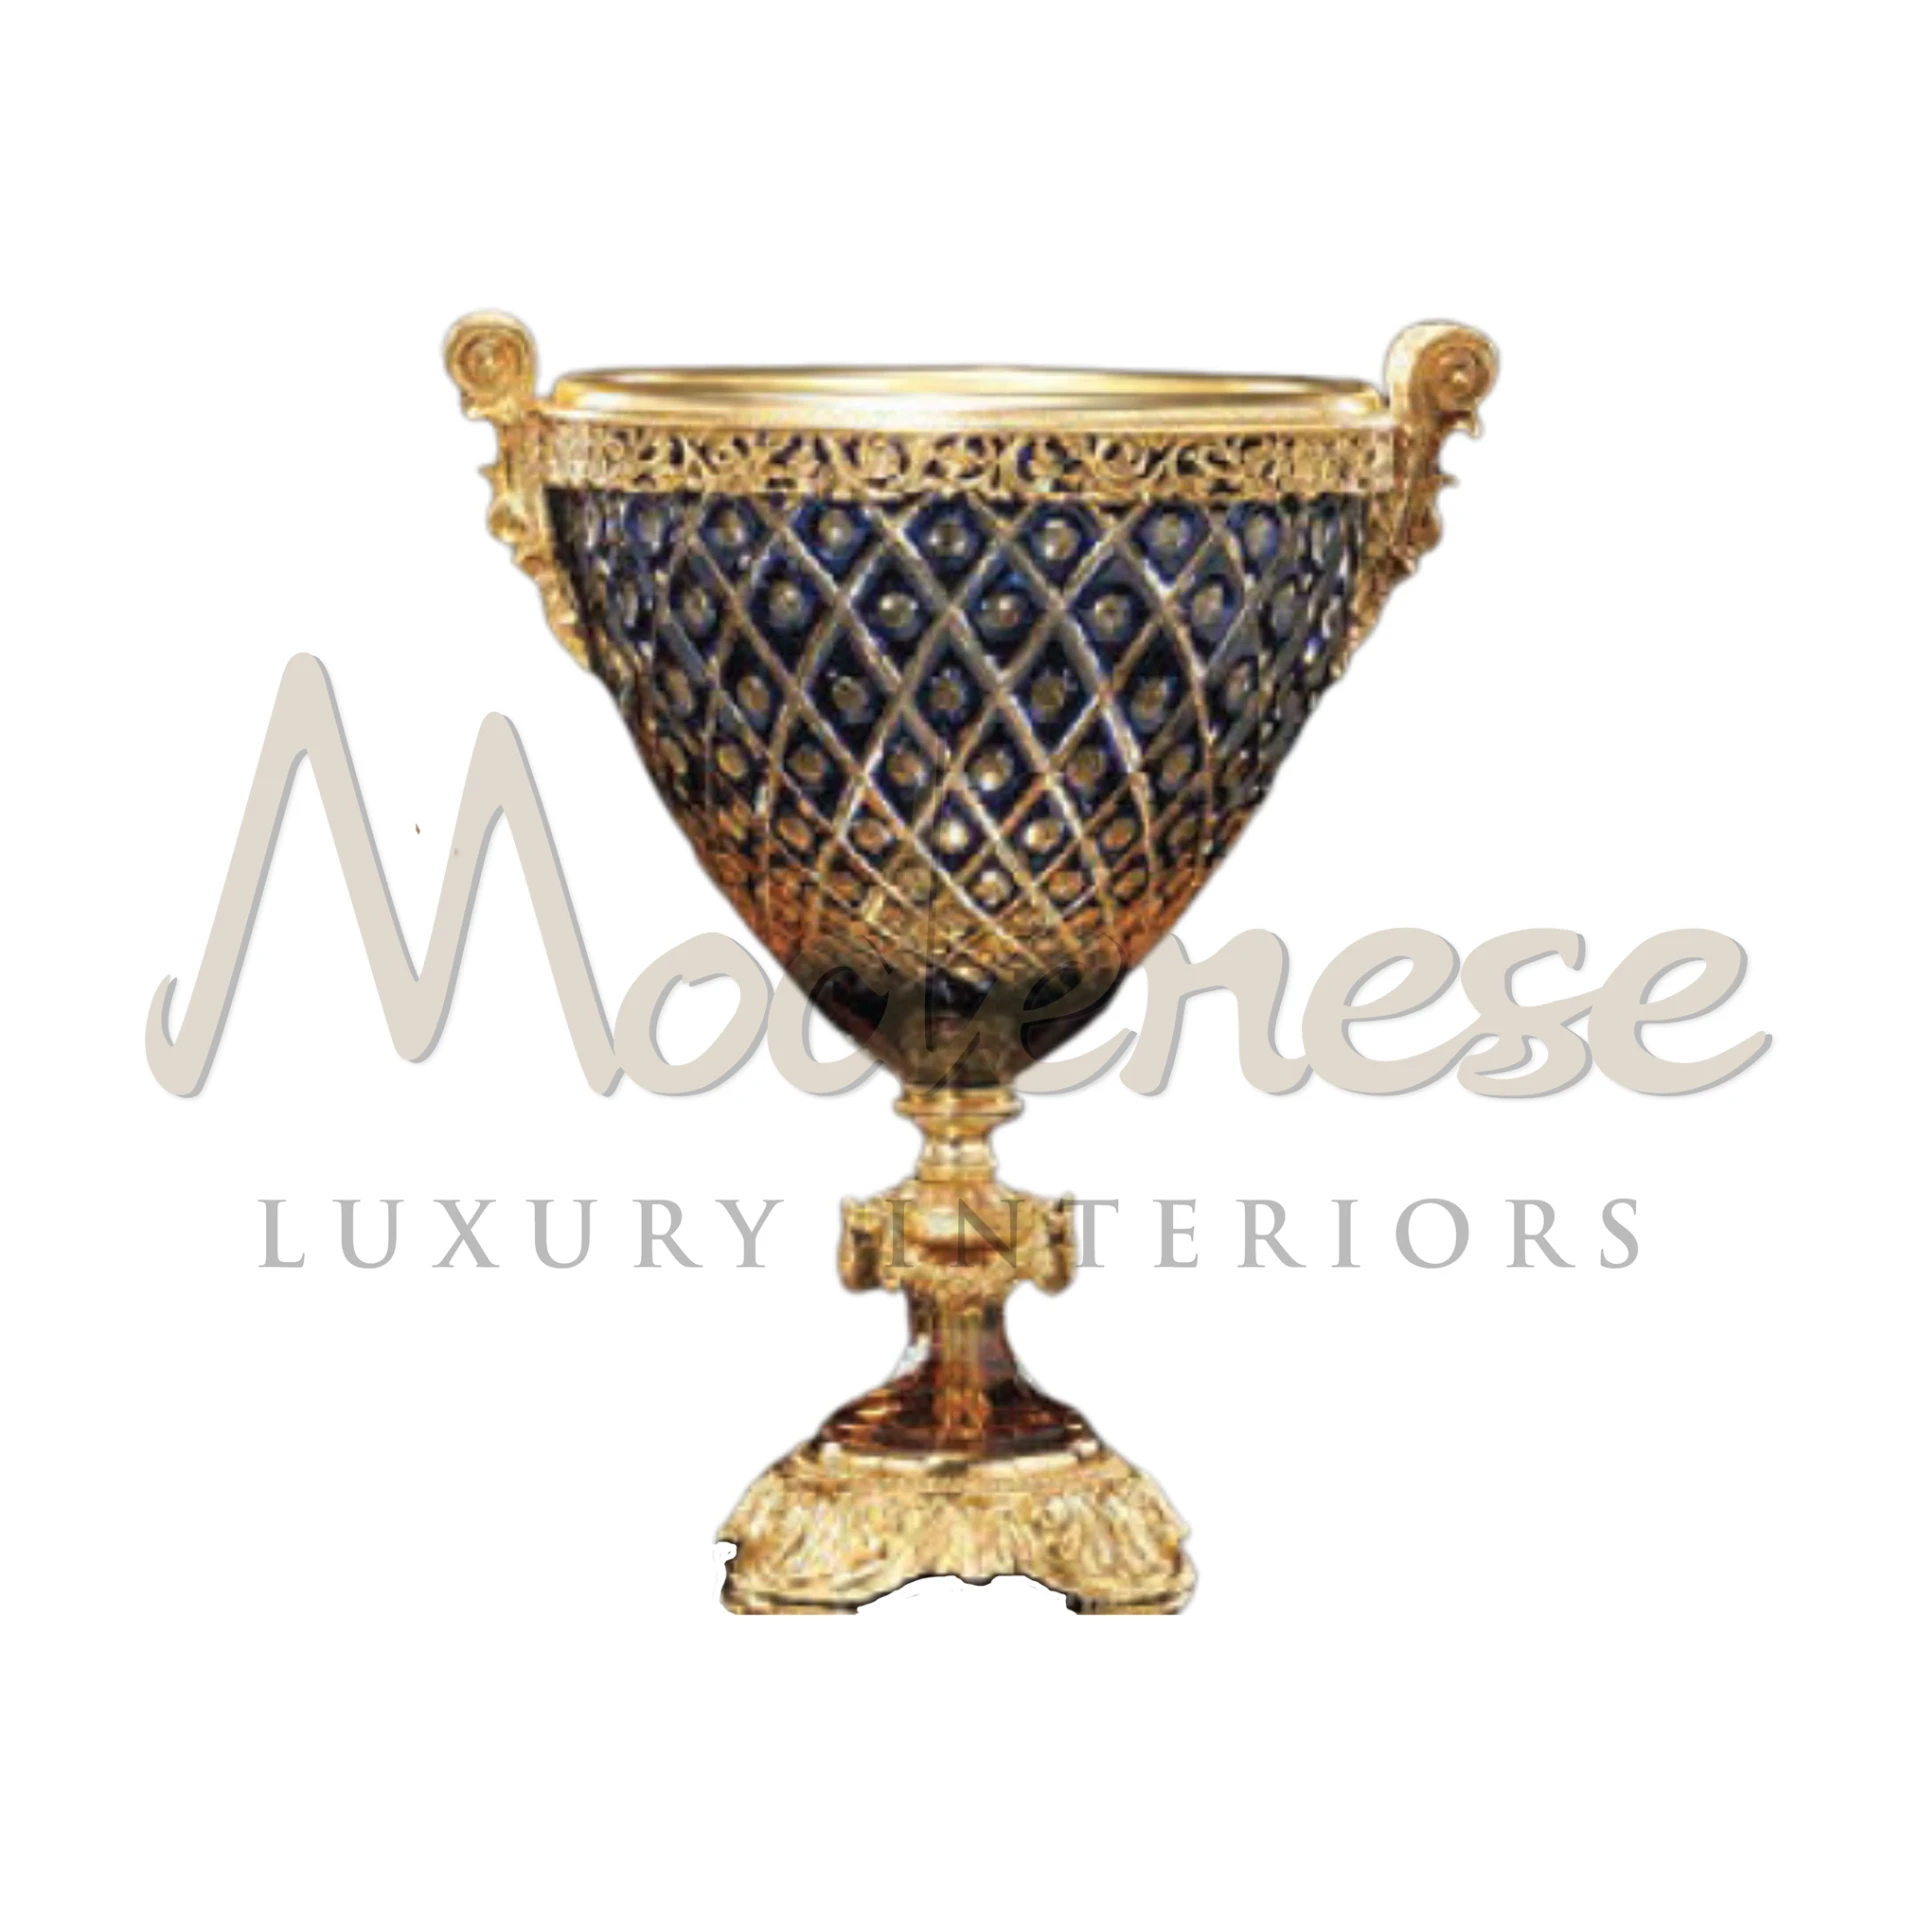 Elegant dark classic design vase in ceramic, glass, or metal, with a refined finish, enhancing luxury and sophistication.